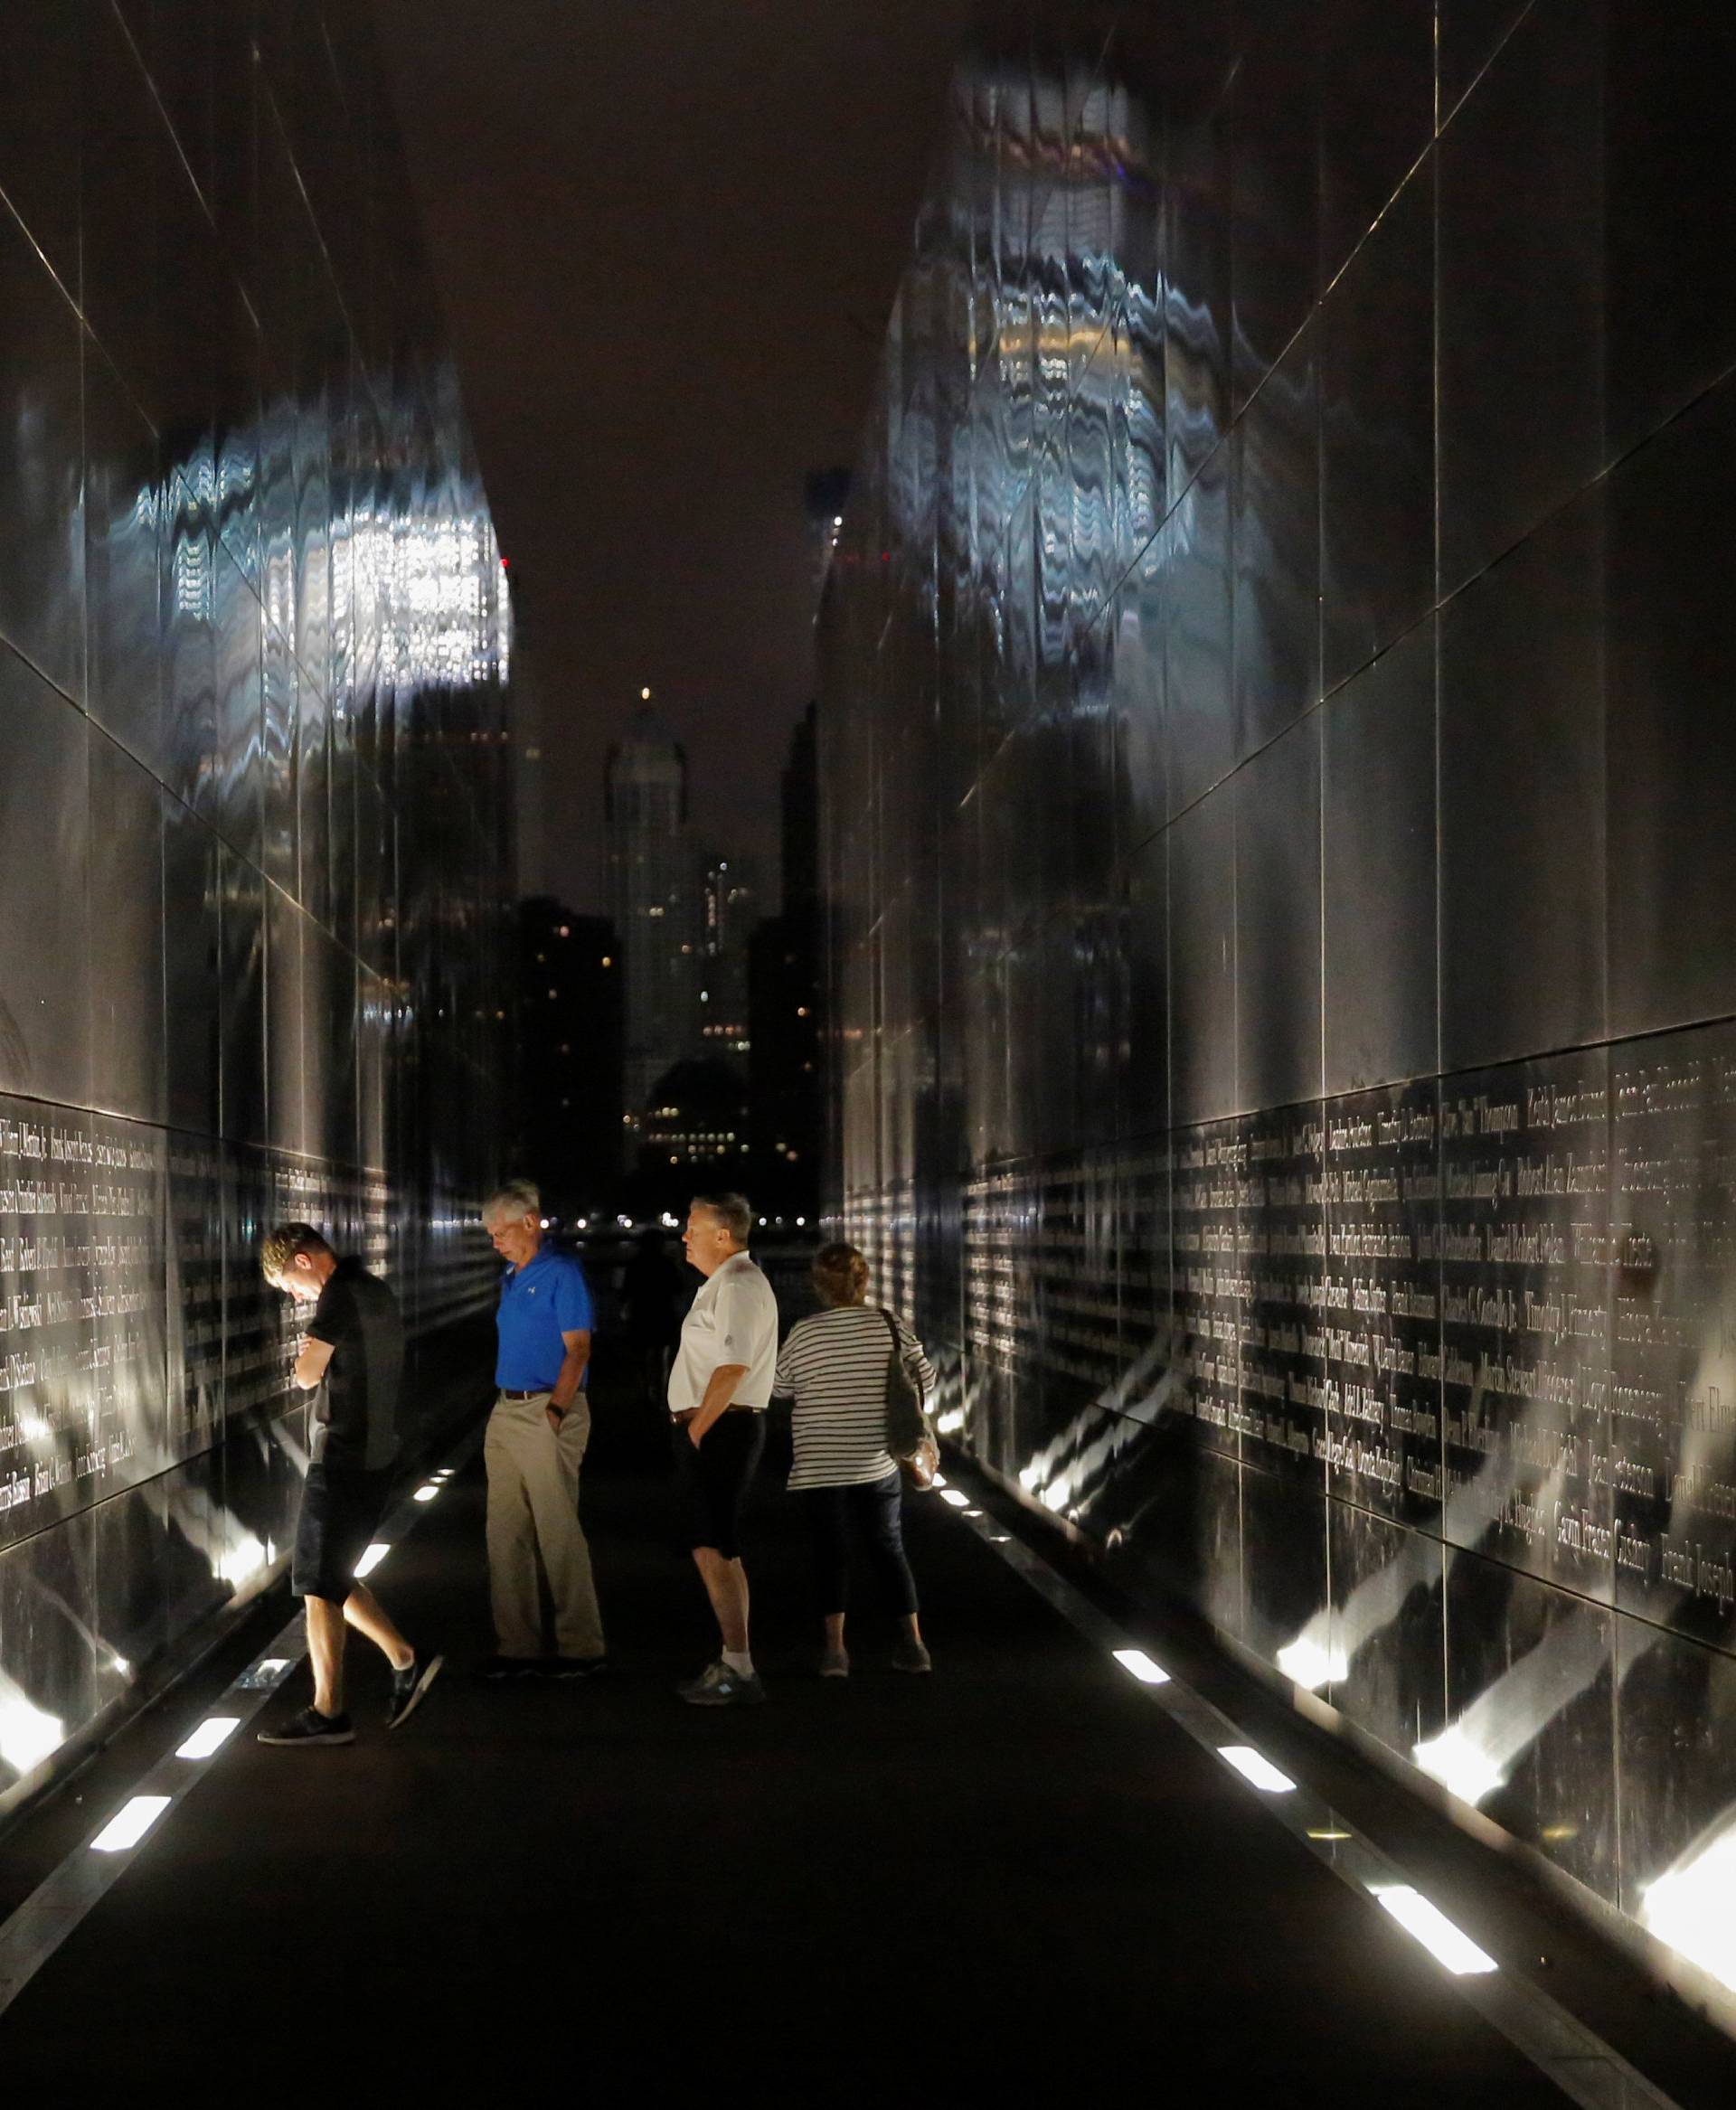 People gather at the Empty Sky memorial on the morning of the 15th anniversary of the 9/11 attacks in New Jersey